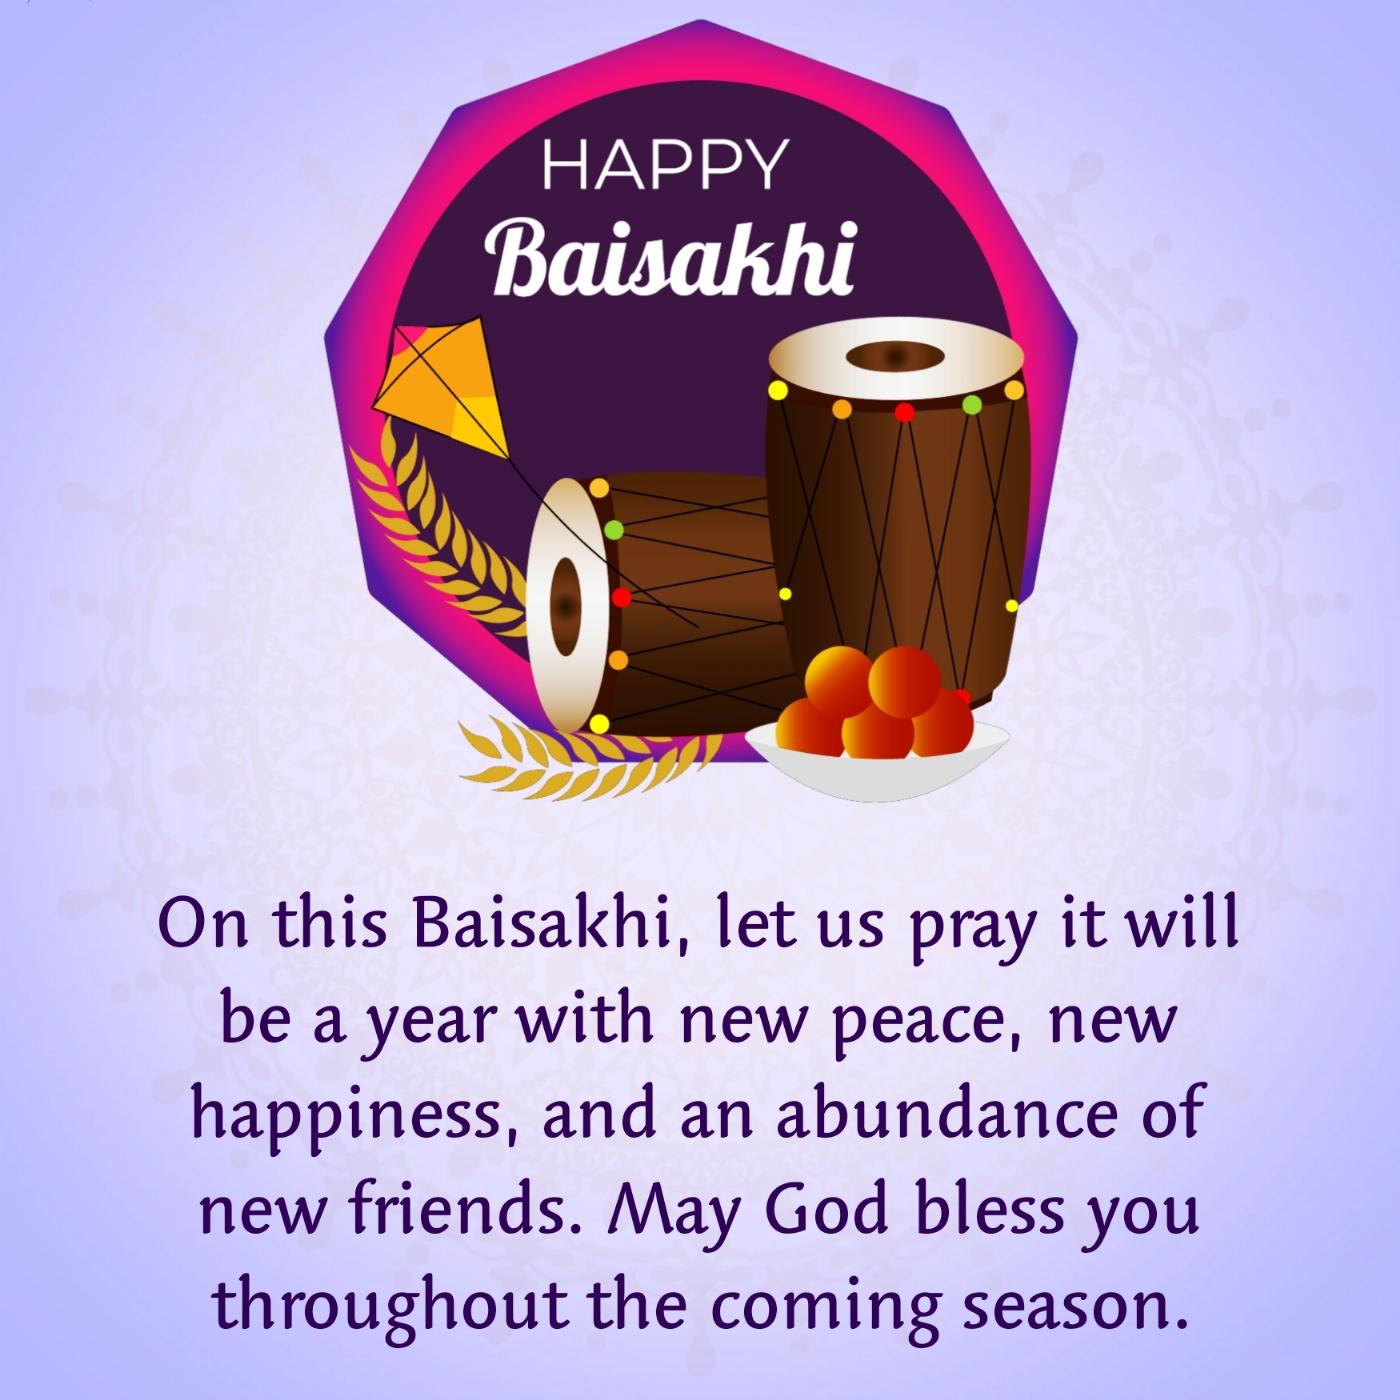 On this Baisakhi let us pray it will be a year with new peace